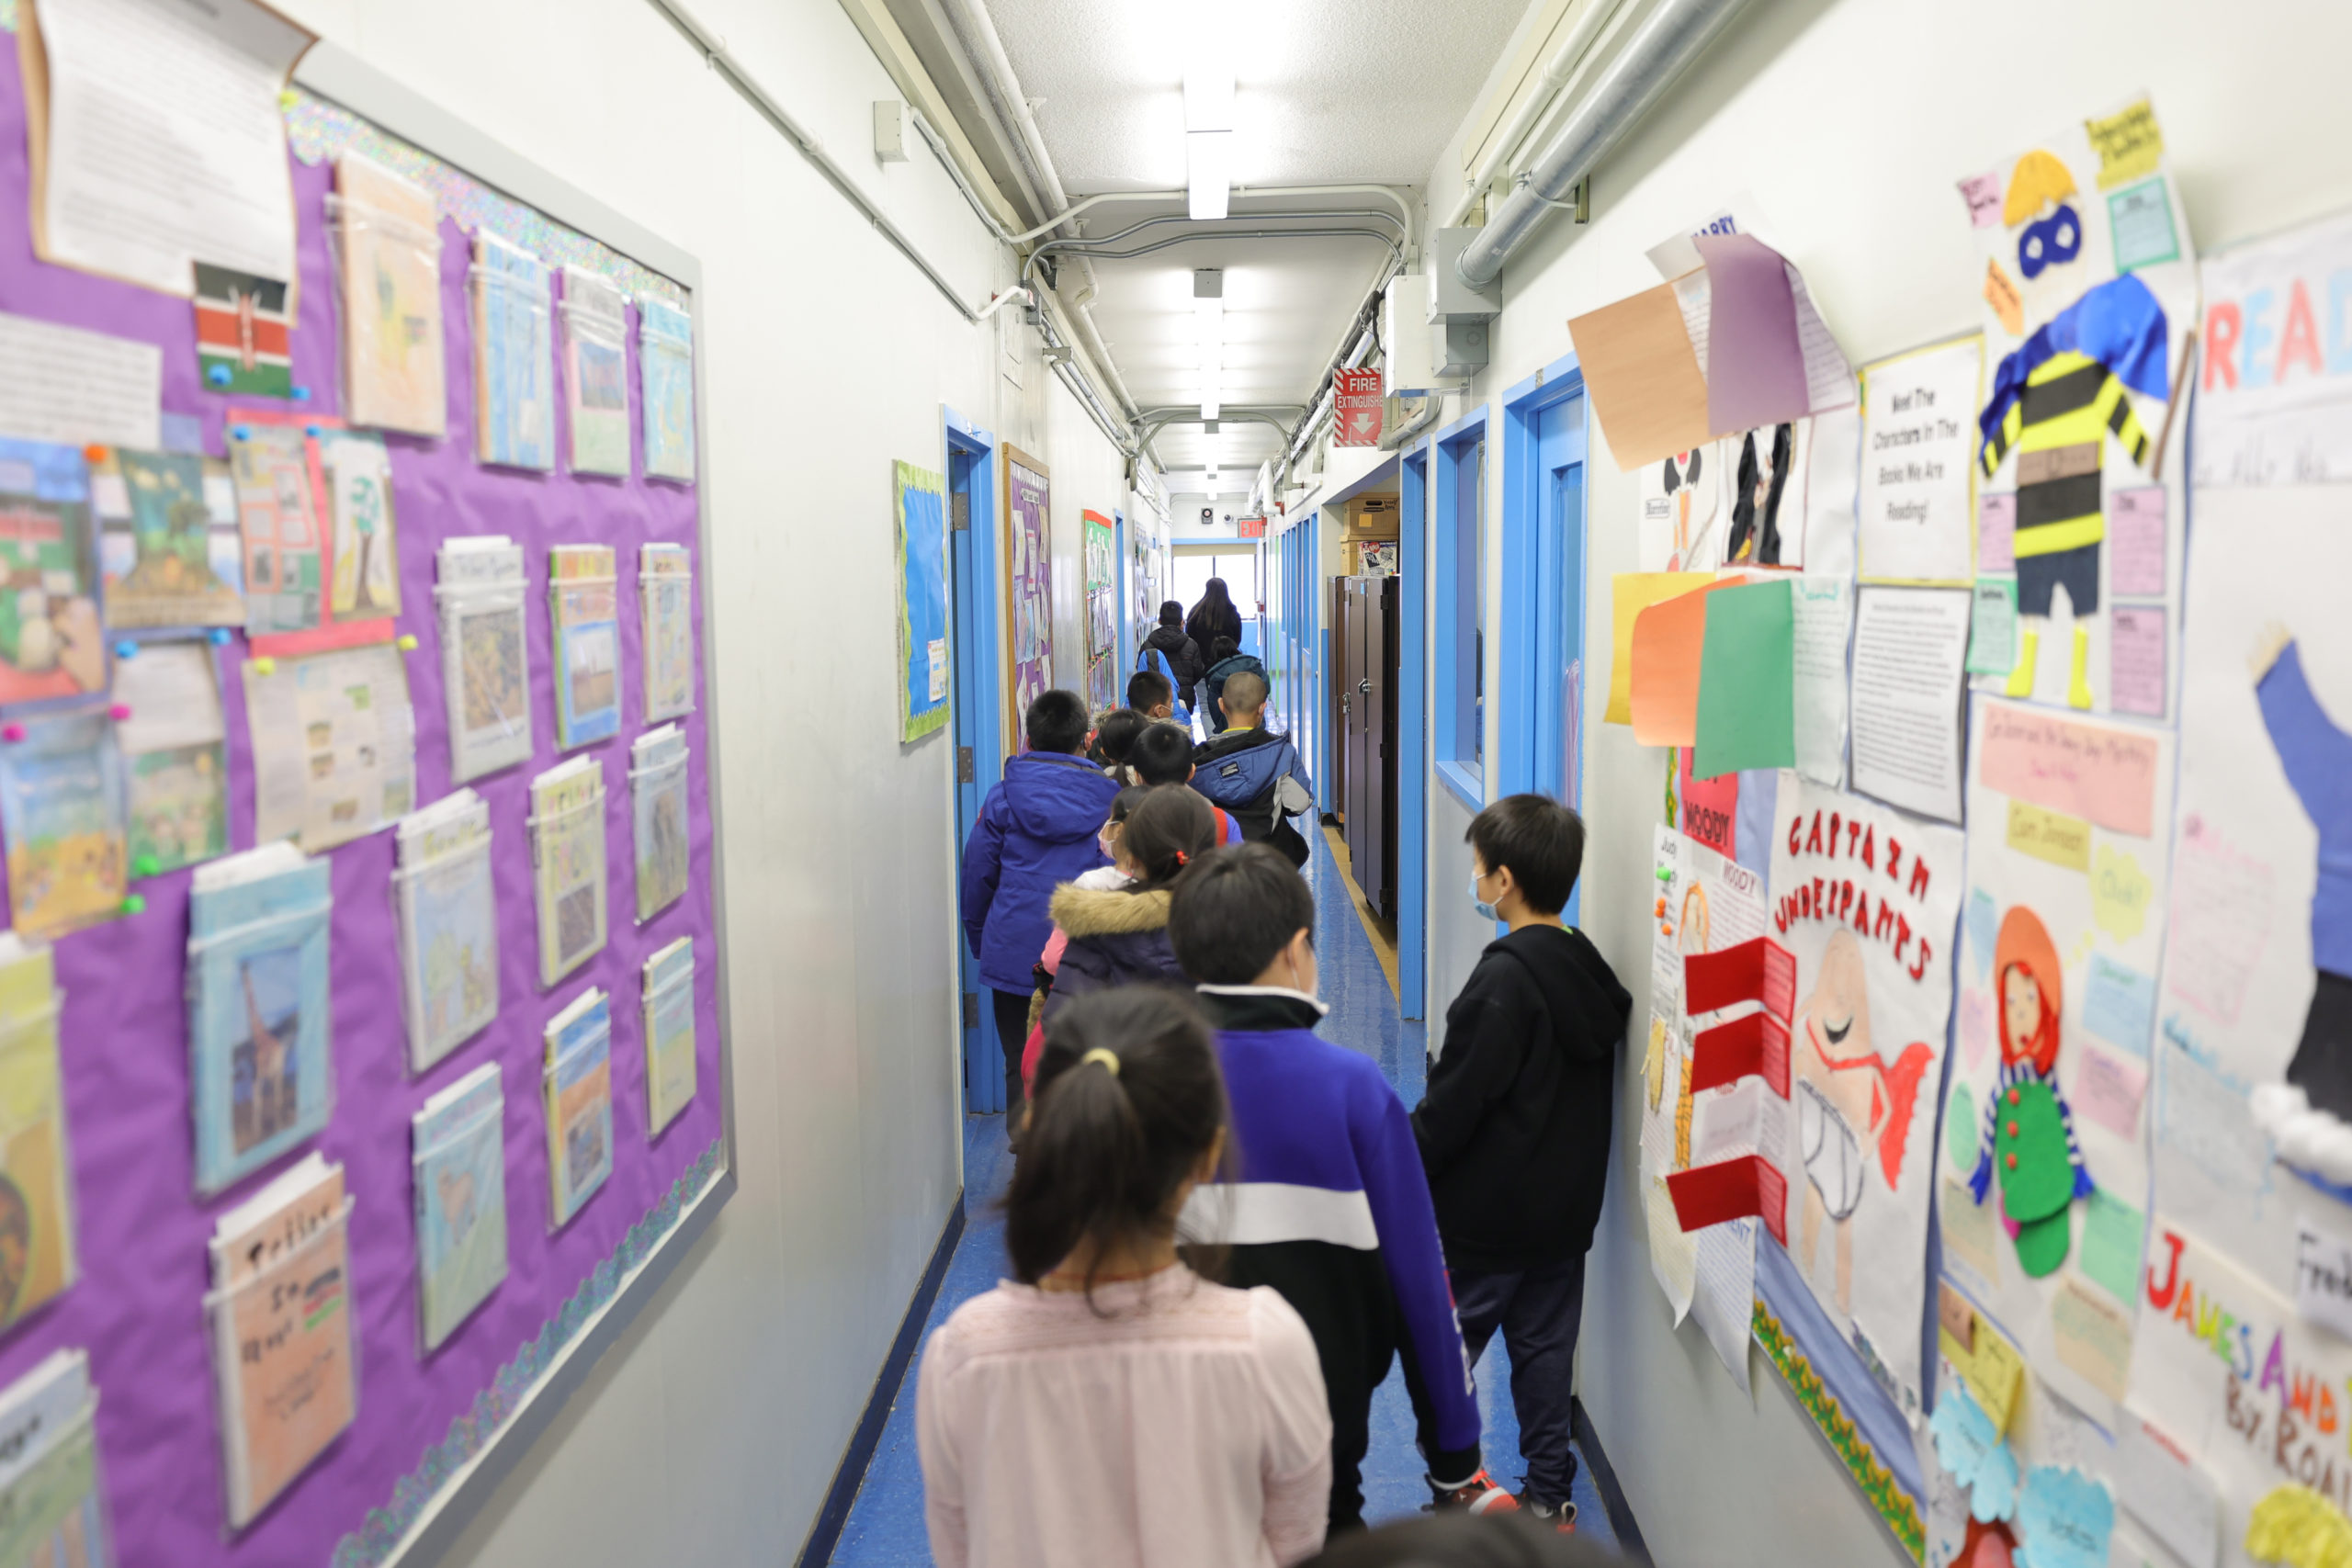 Students are led to their classroom by Marisa Wiezel (who is related to the photographer), a teacher at Yung Wing School P.S. 124 on March 07, 2022 in New York City. (Photo by Michael Loccisano/Getty Images)